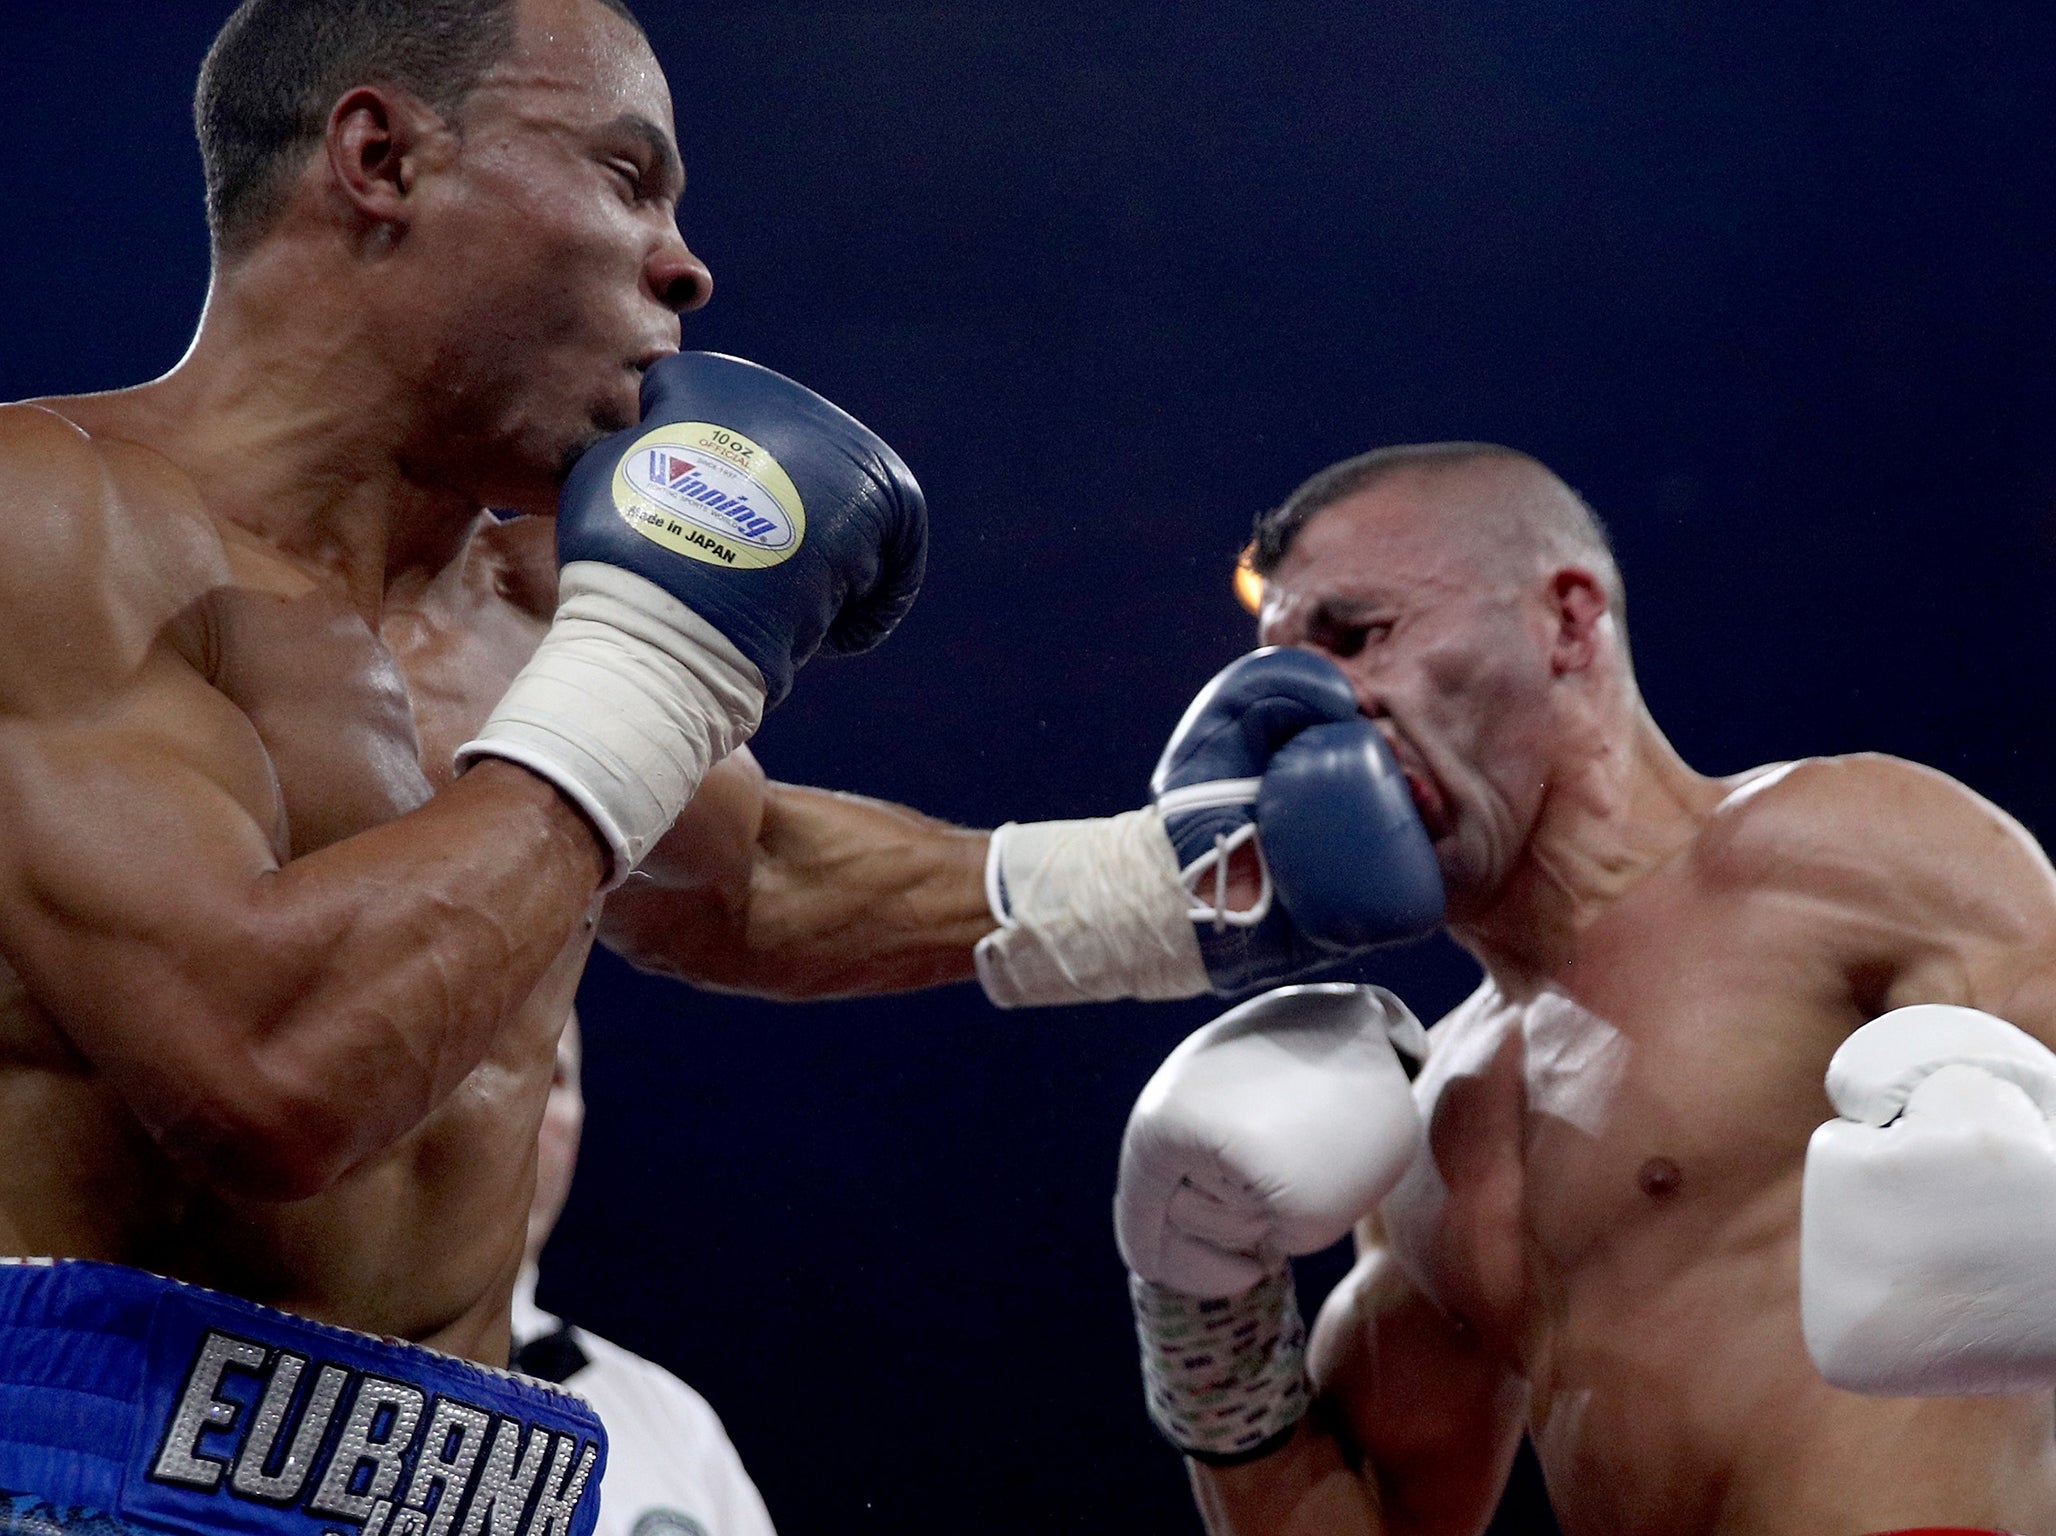 Eubank Jr won the fight in the third round